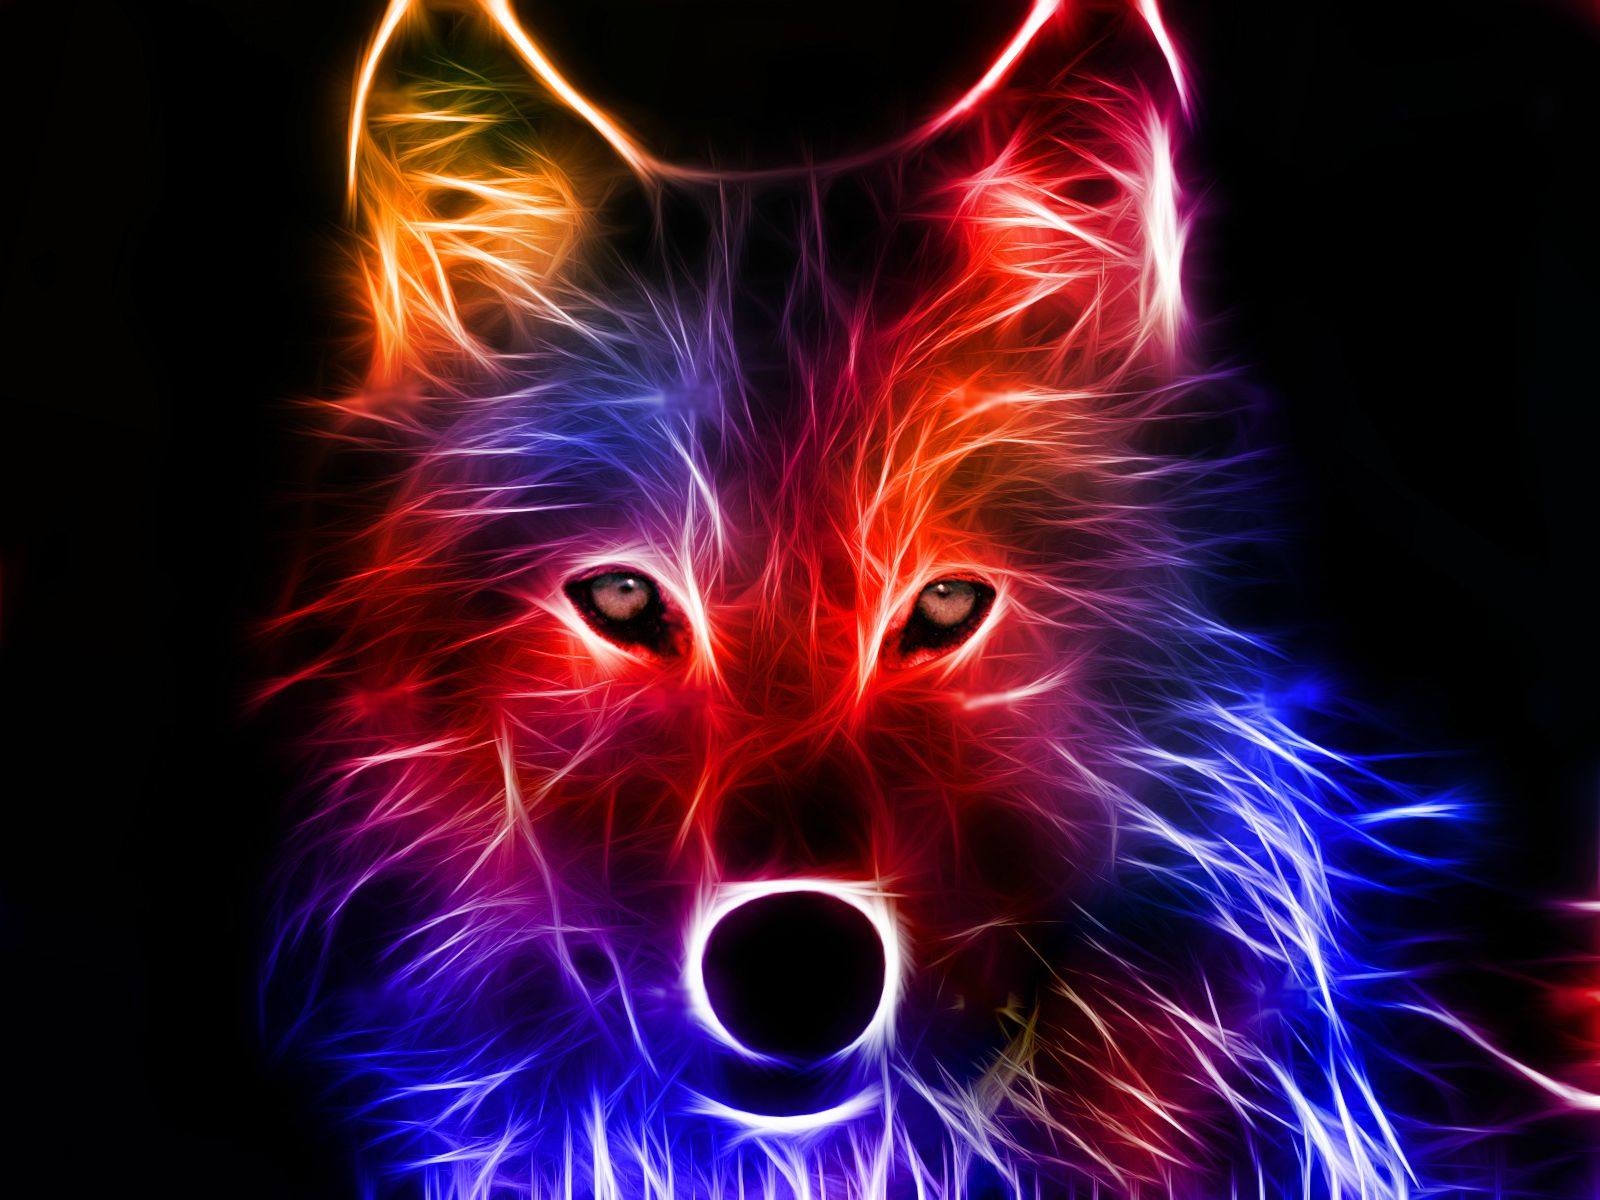 Colorful fox hd 3D wallpaper images wide wallpapers download 1600x1200